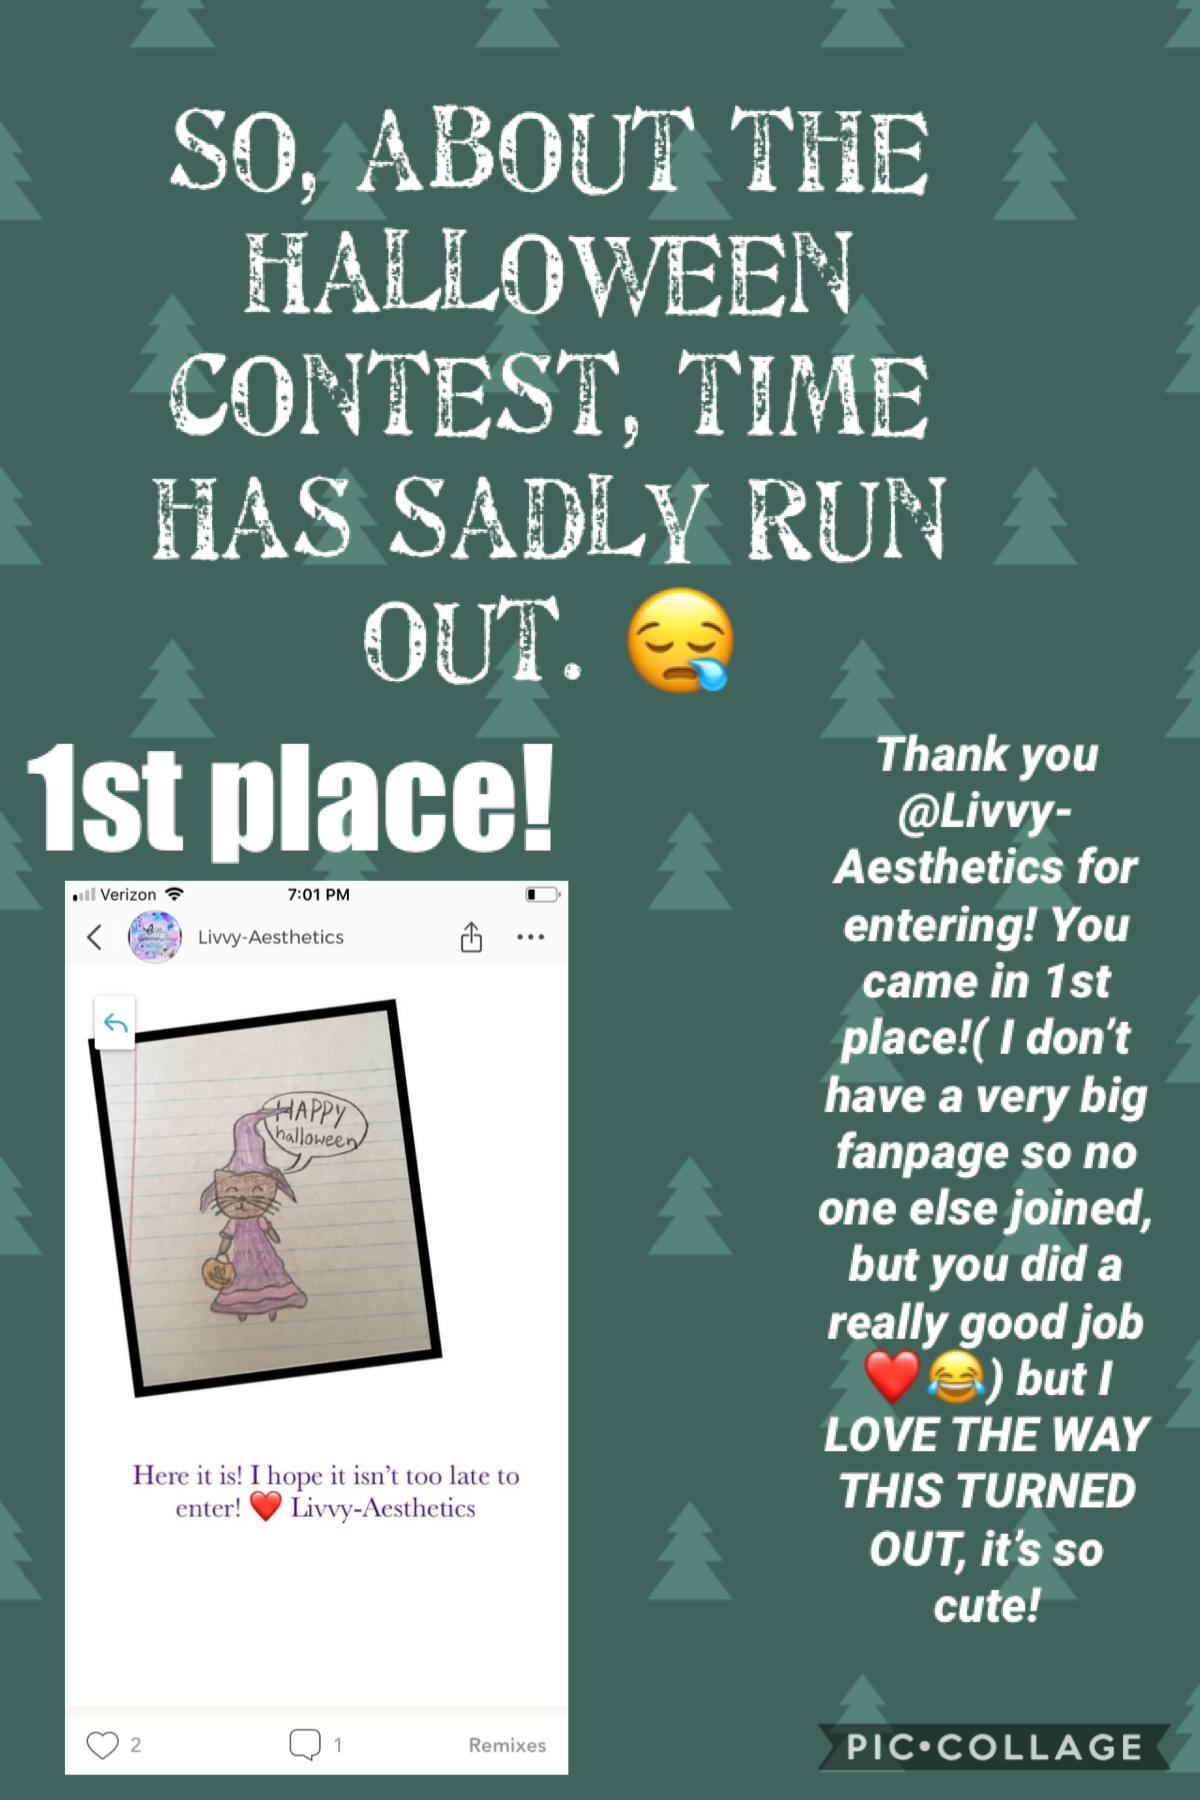 Thank you for joining❤️ I will be doing a Christmas contest so be ready for that! 